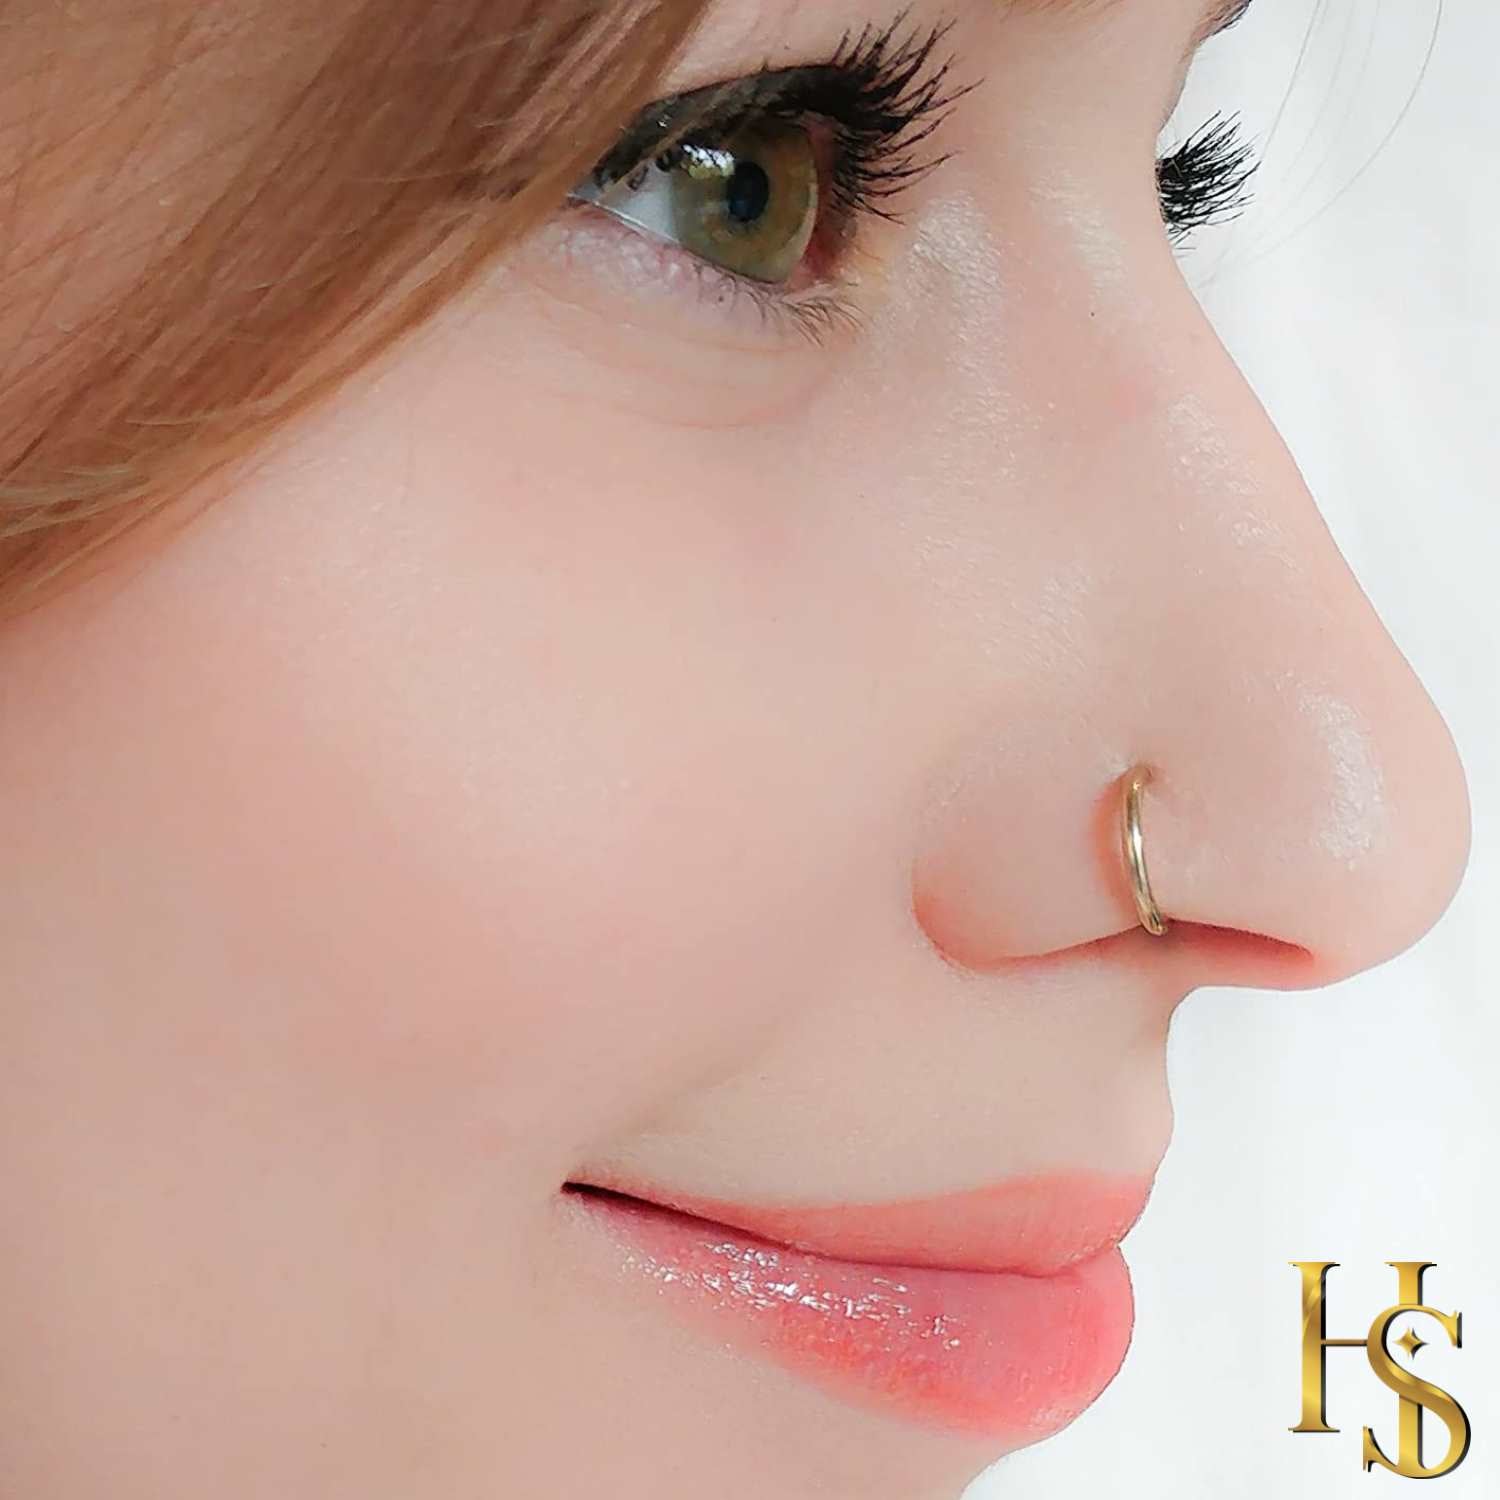 Gold Nose Stud 20G L Shape, Nose Piercing Ring, Stud Nose Ring, Nose Jewelry,  Titanium Nose Ring, Flower Nose Stud, Diamond Nose Stud - Etsy | Nose  jewelry, Simple stud earrings, Pretty